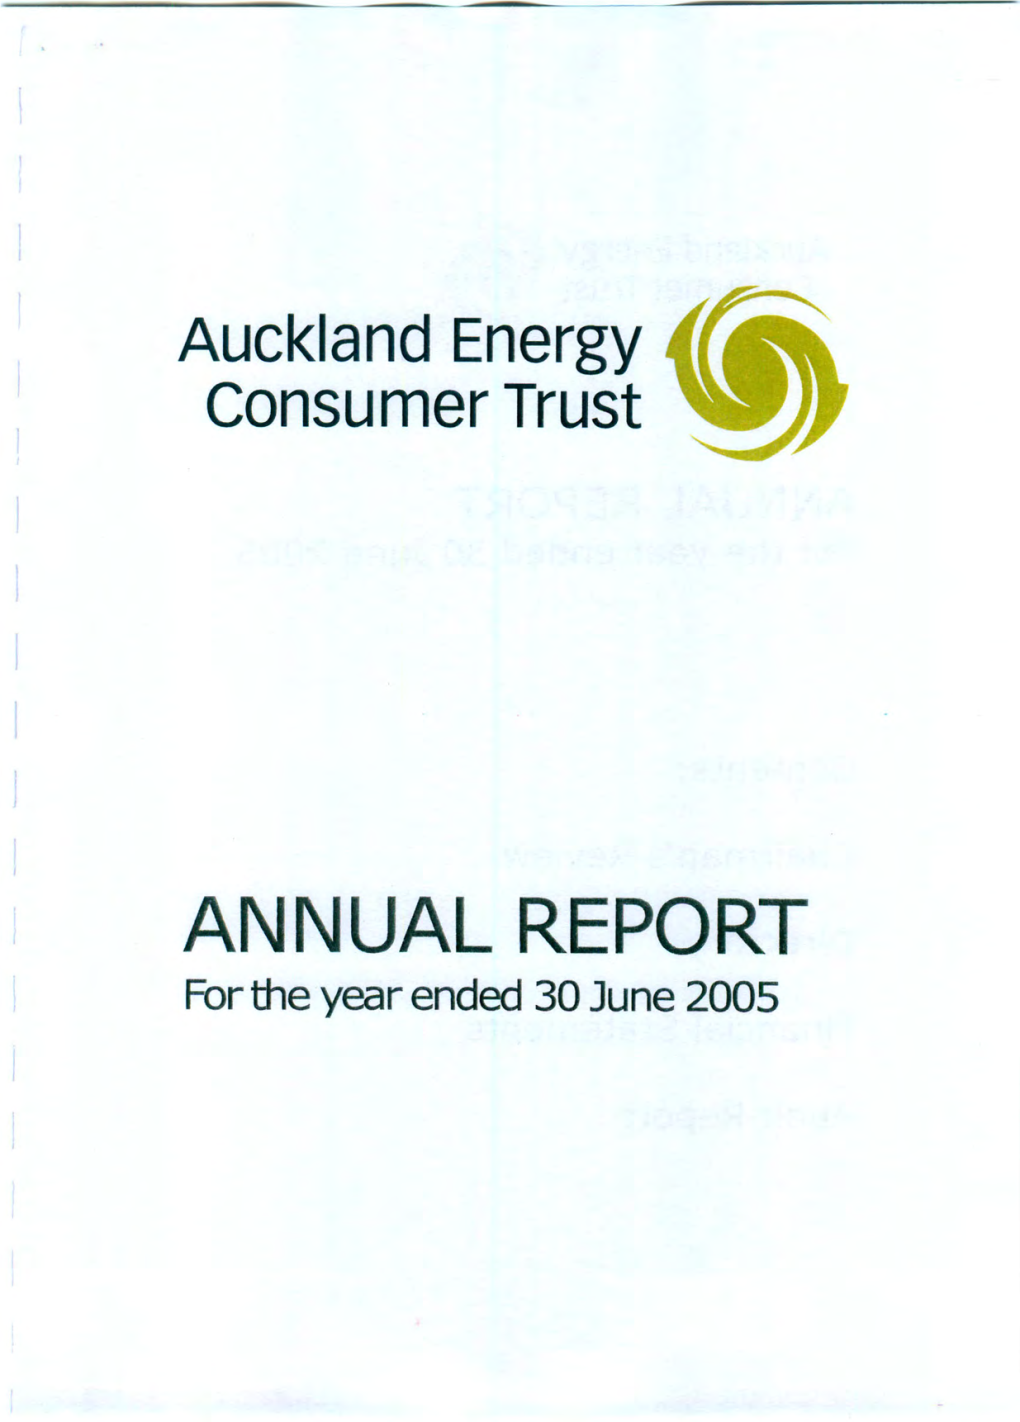 ANNUAL REPORT for the Year Ended 30 June 2005 Auckland Energy Consumer Trust